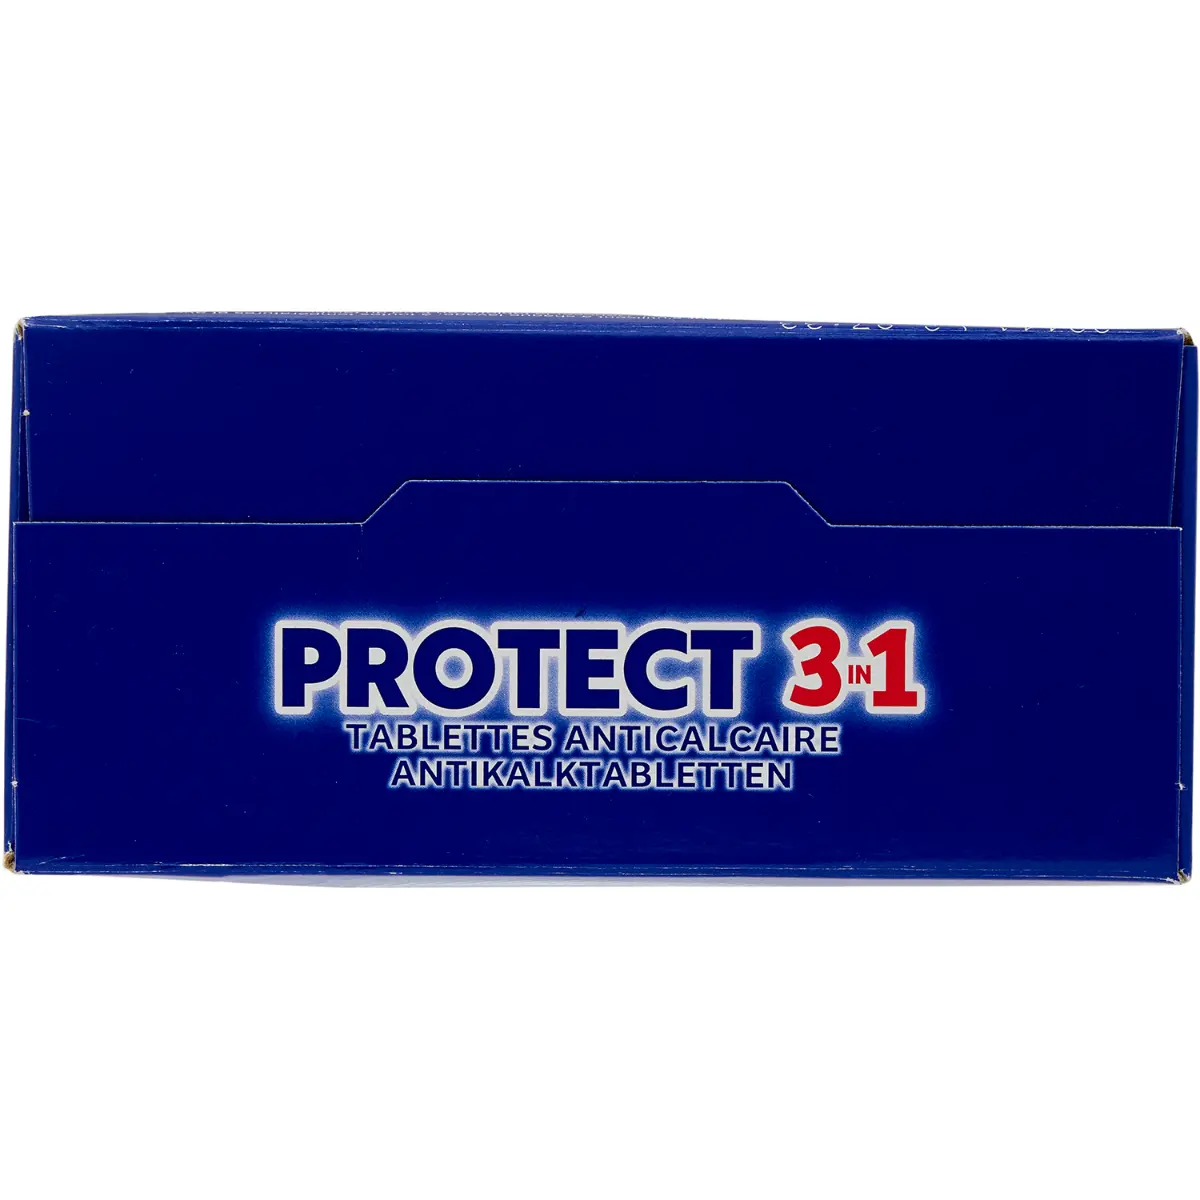 Tablete anticalcar Carrefour Expert Protect 3in1, 45 bucati